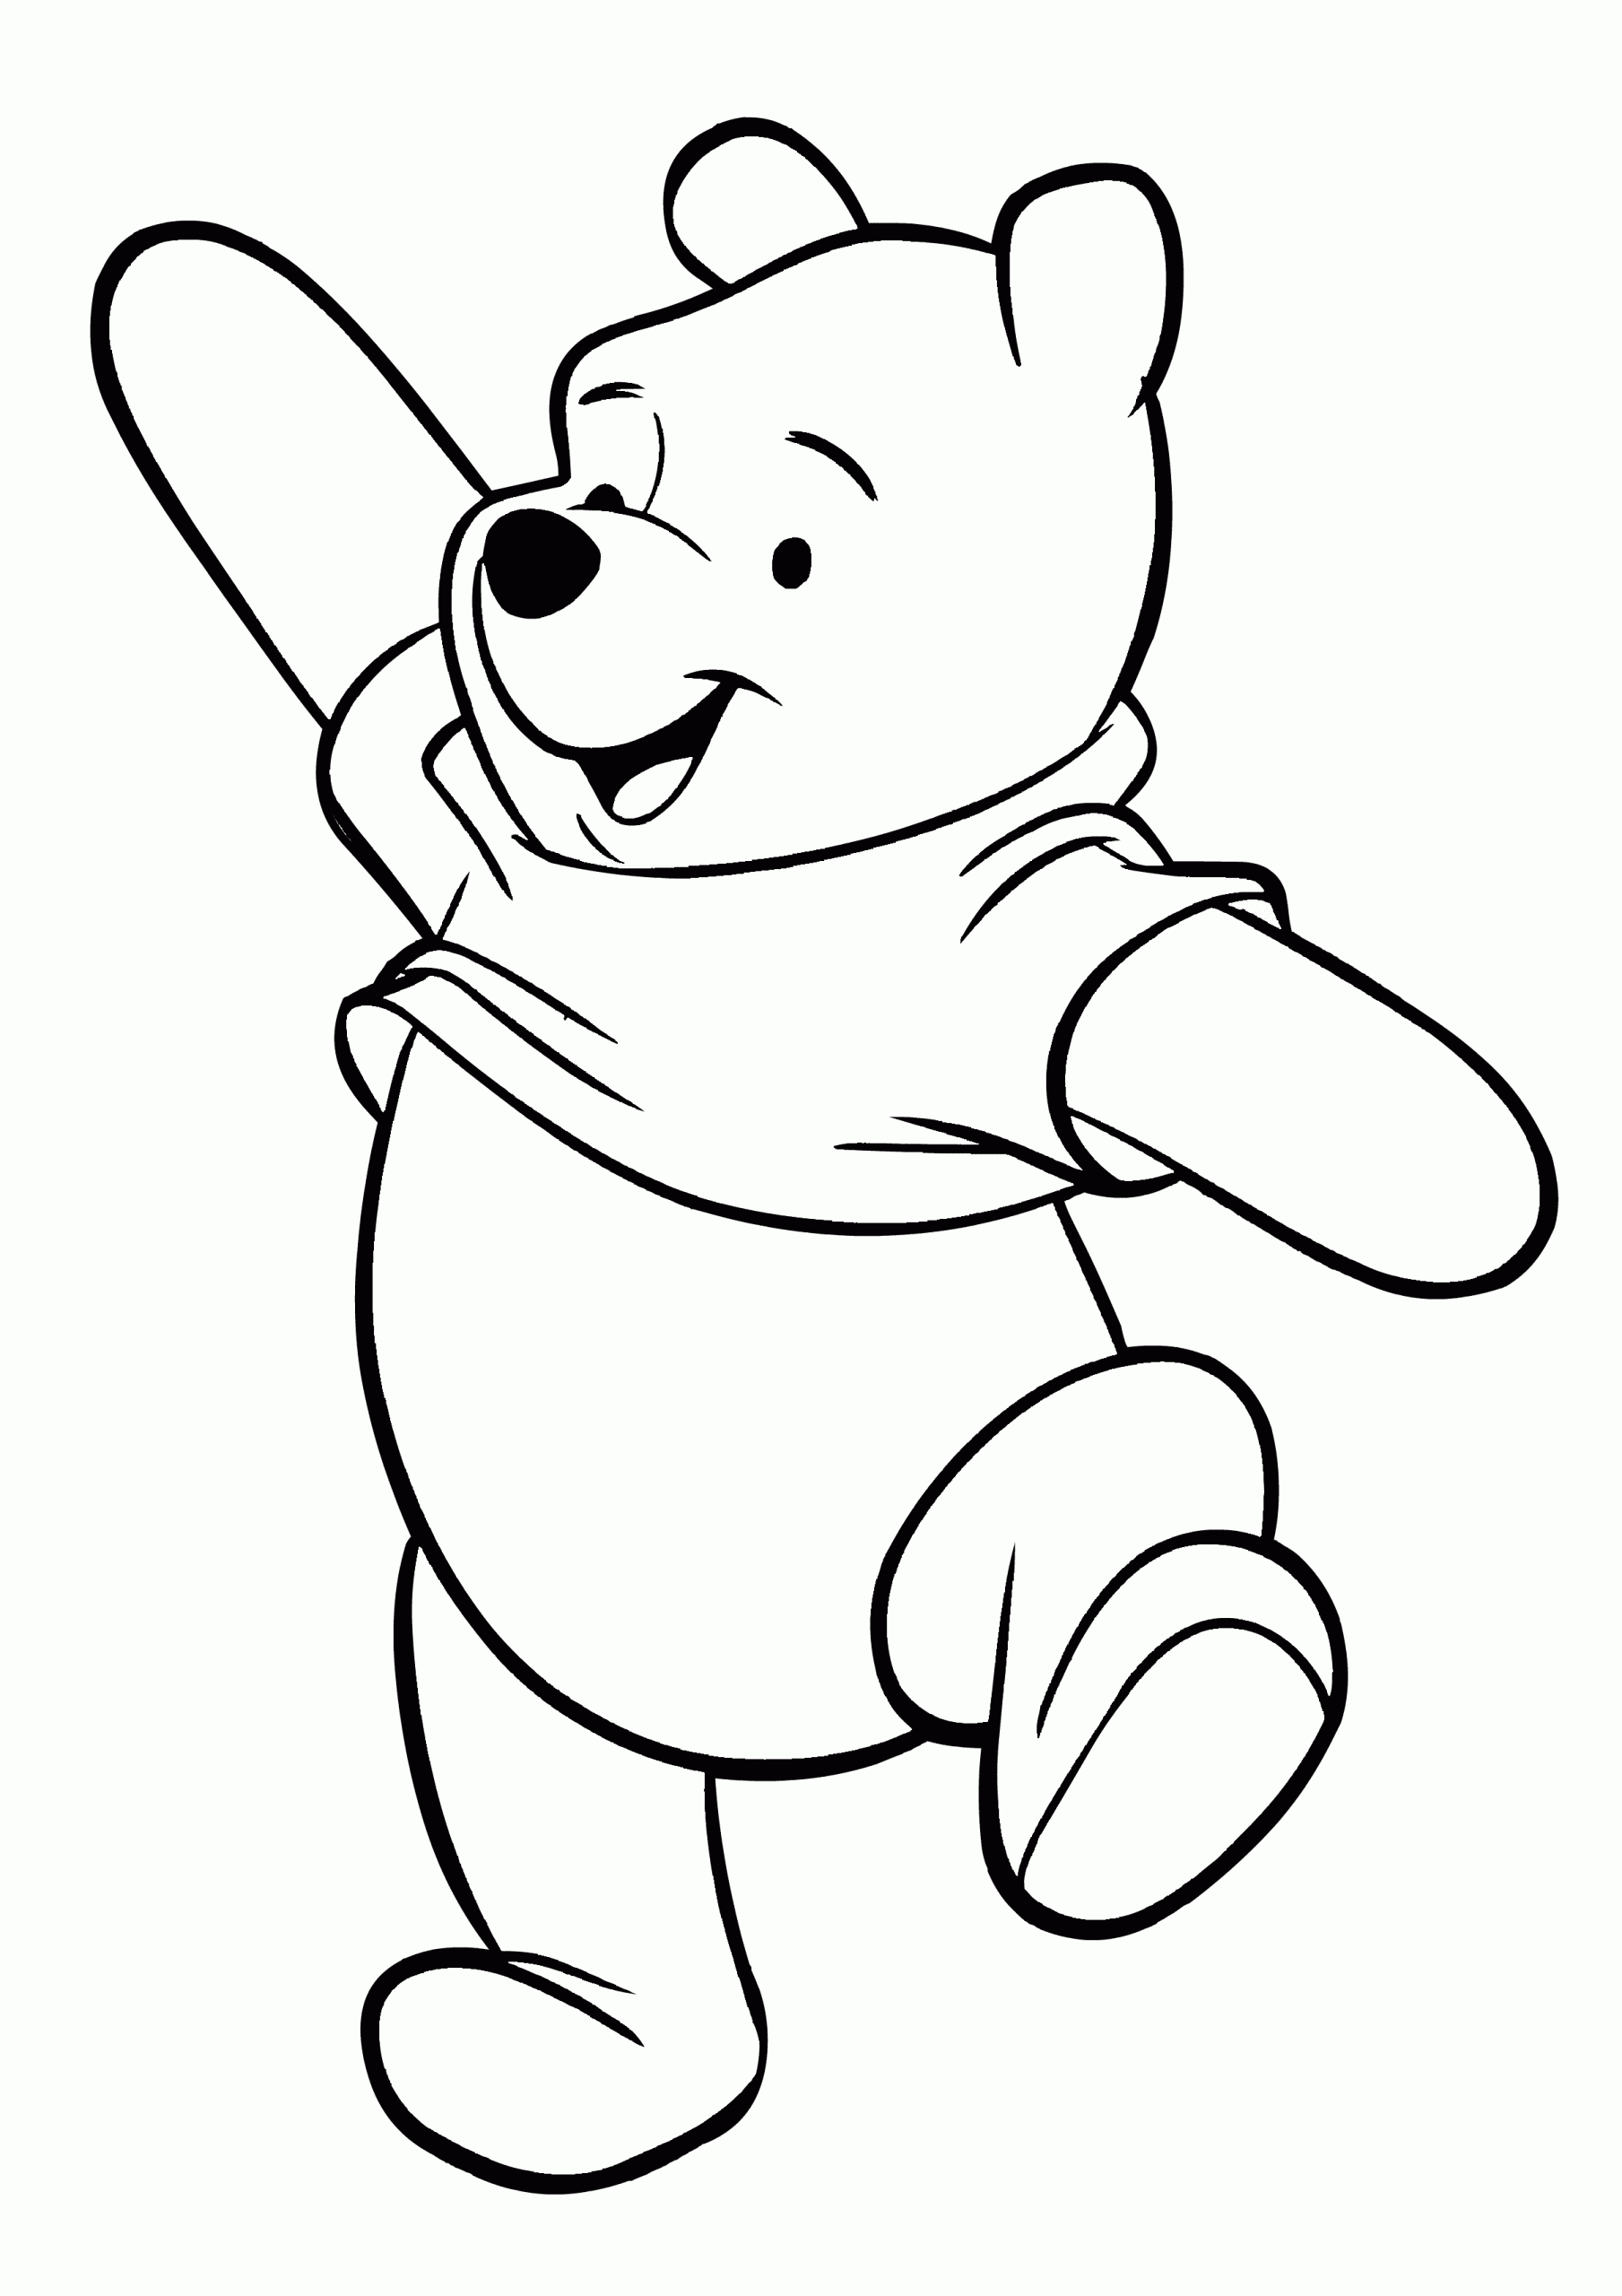 Printable Winnie Pooh Coloring Pages for Kids Disney Coloring Pages